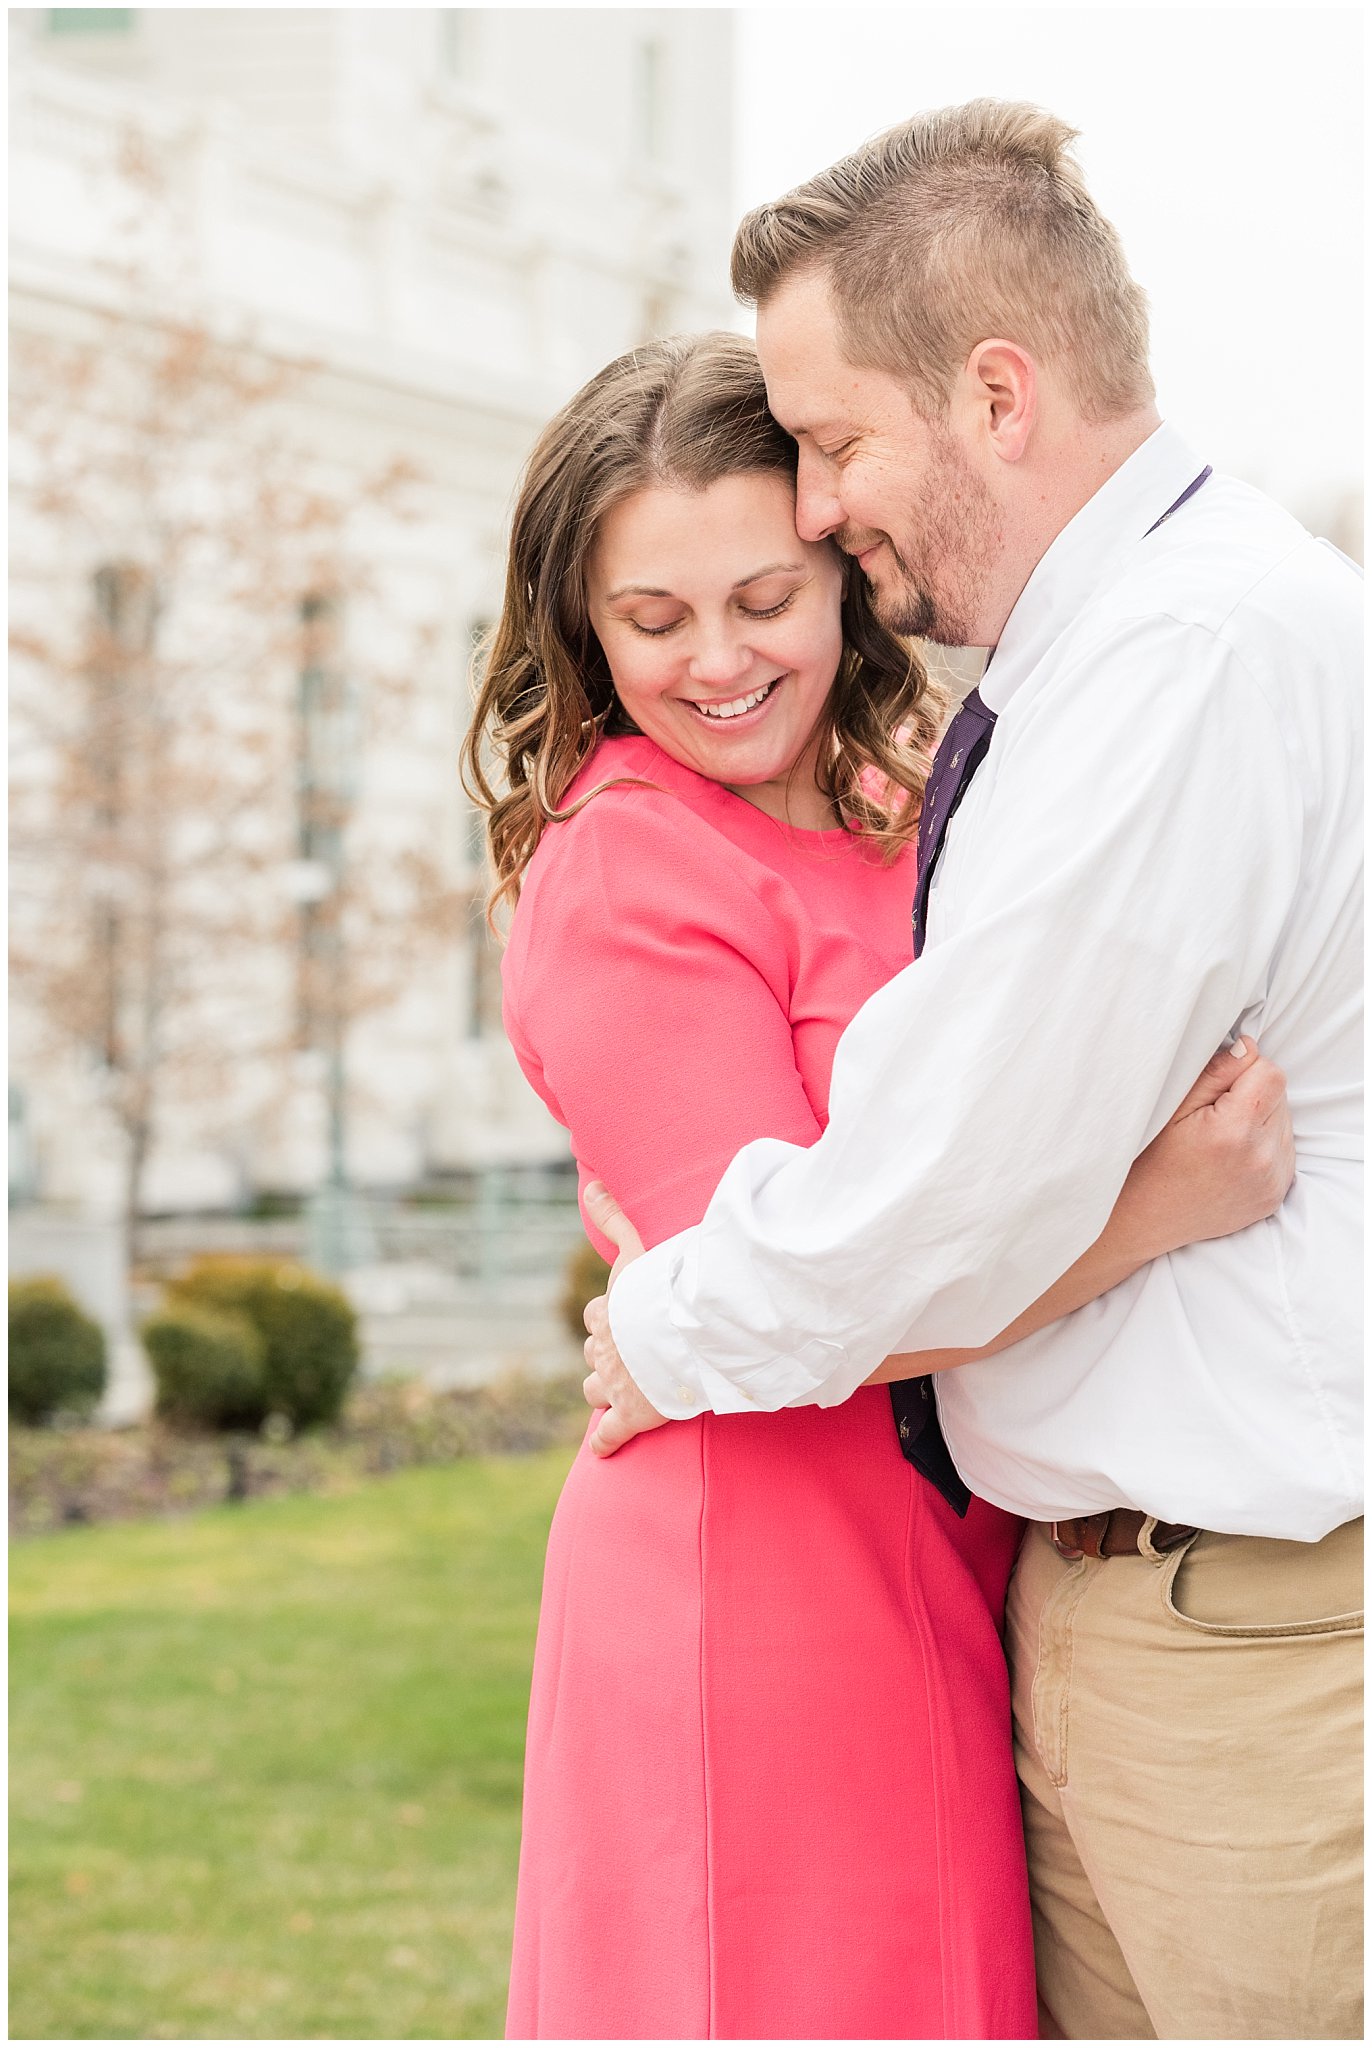 Couple on the pedestal at the temple, candid moment | Salt Lake Temple Sealing | Jessie and Dallin Photography